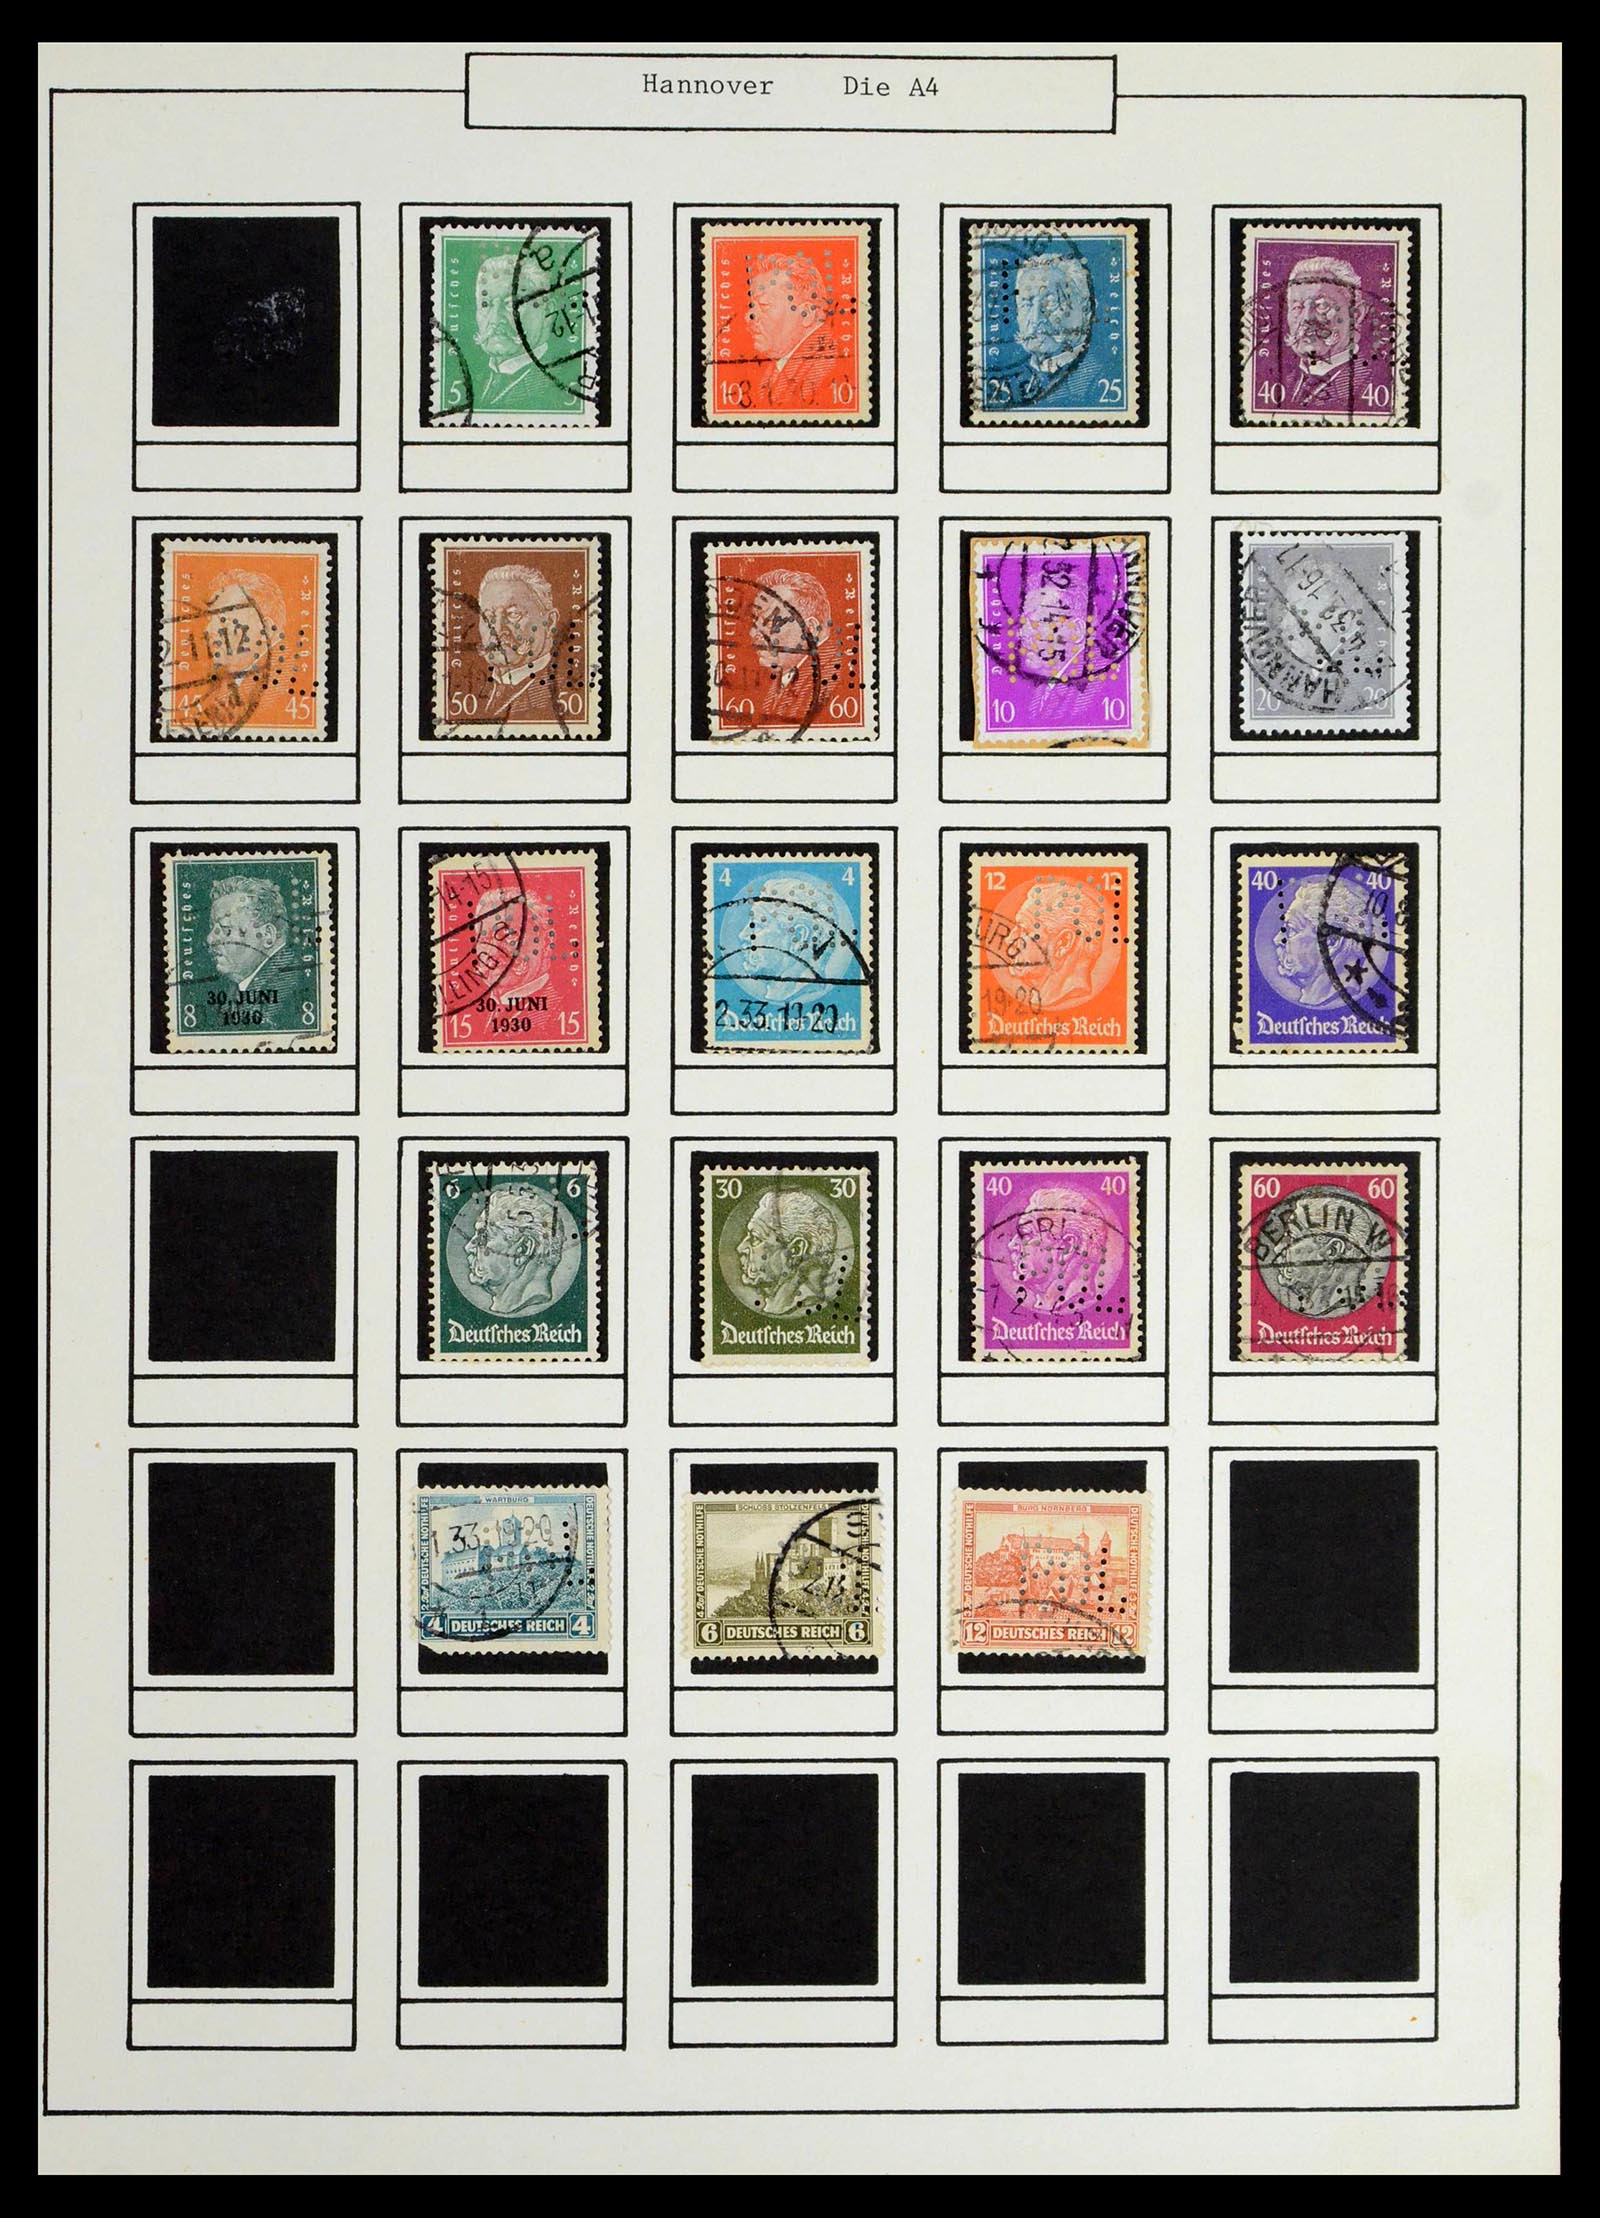 39458 0032 - Stamp collection 39458 Germany POL lochungen 1926-1955.